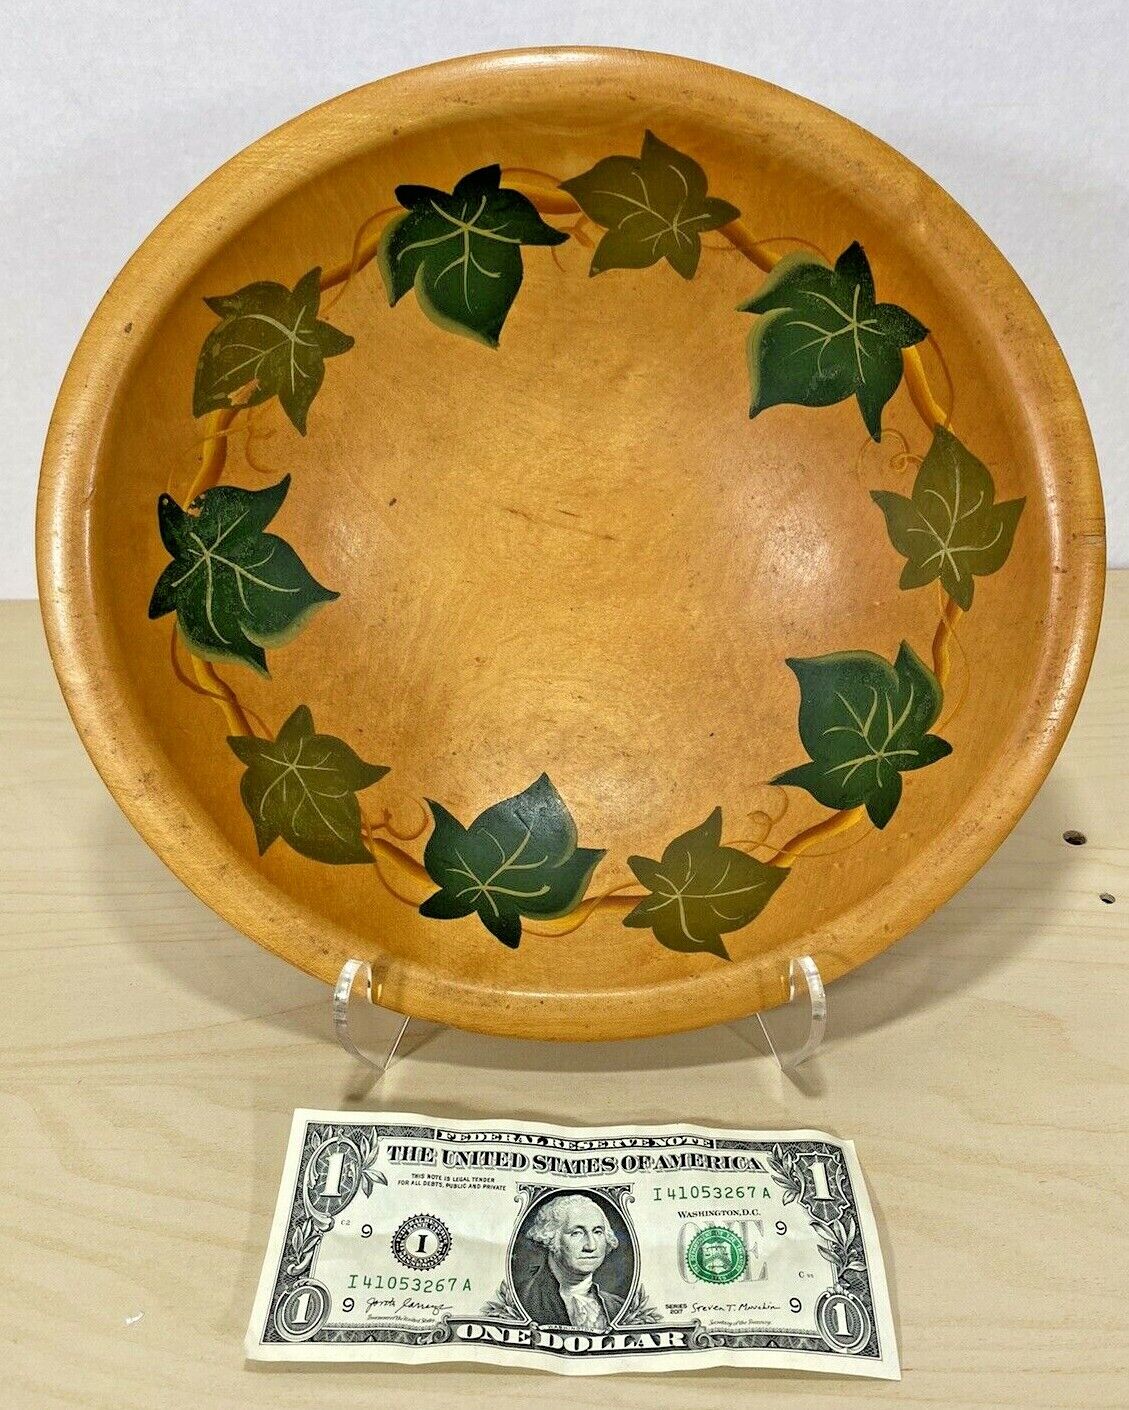 Vintage Decorative Handmade Munising Wooden Bowl with Ivy Leaves Circa 1940's